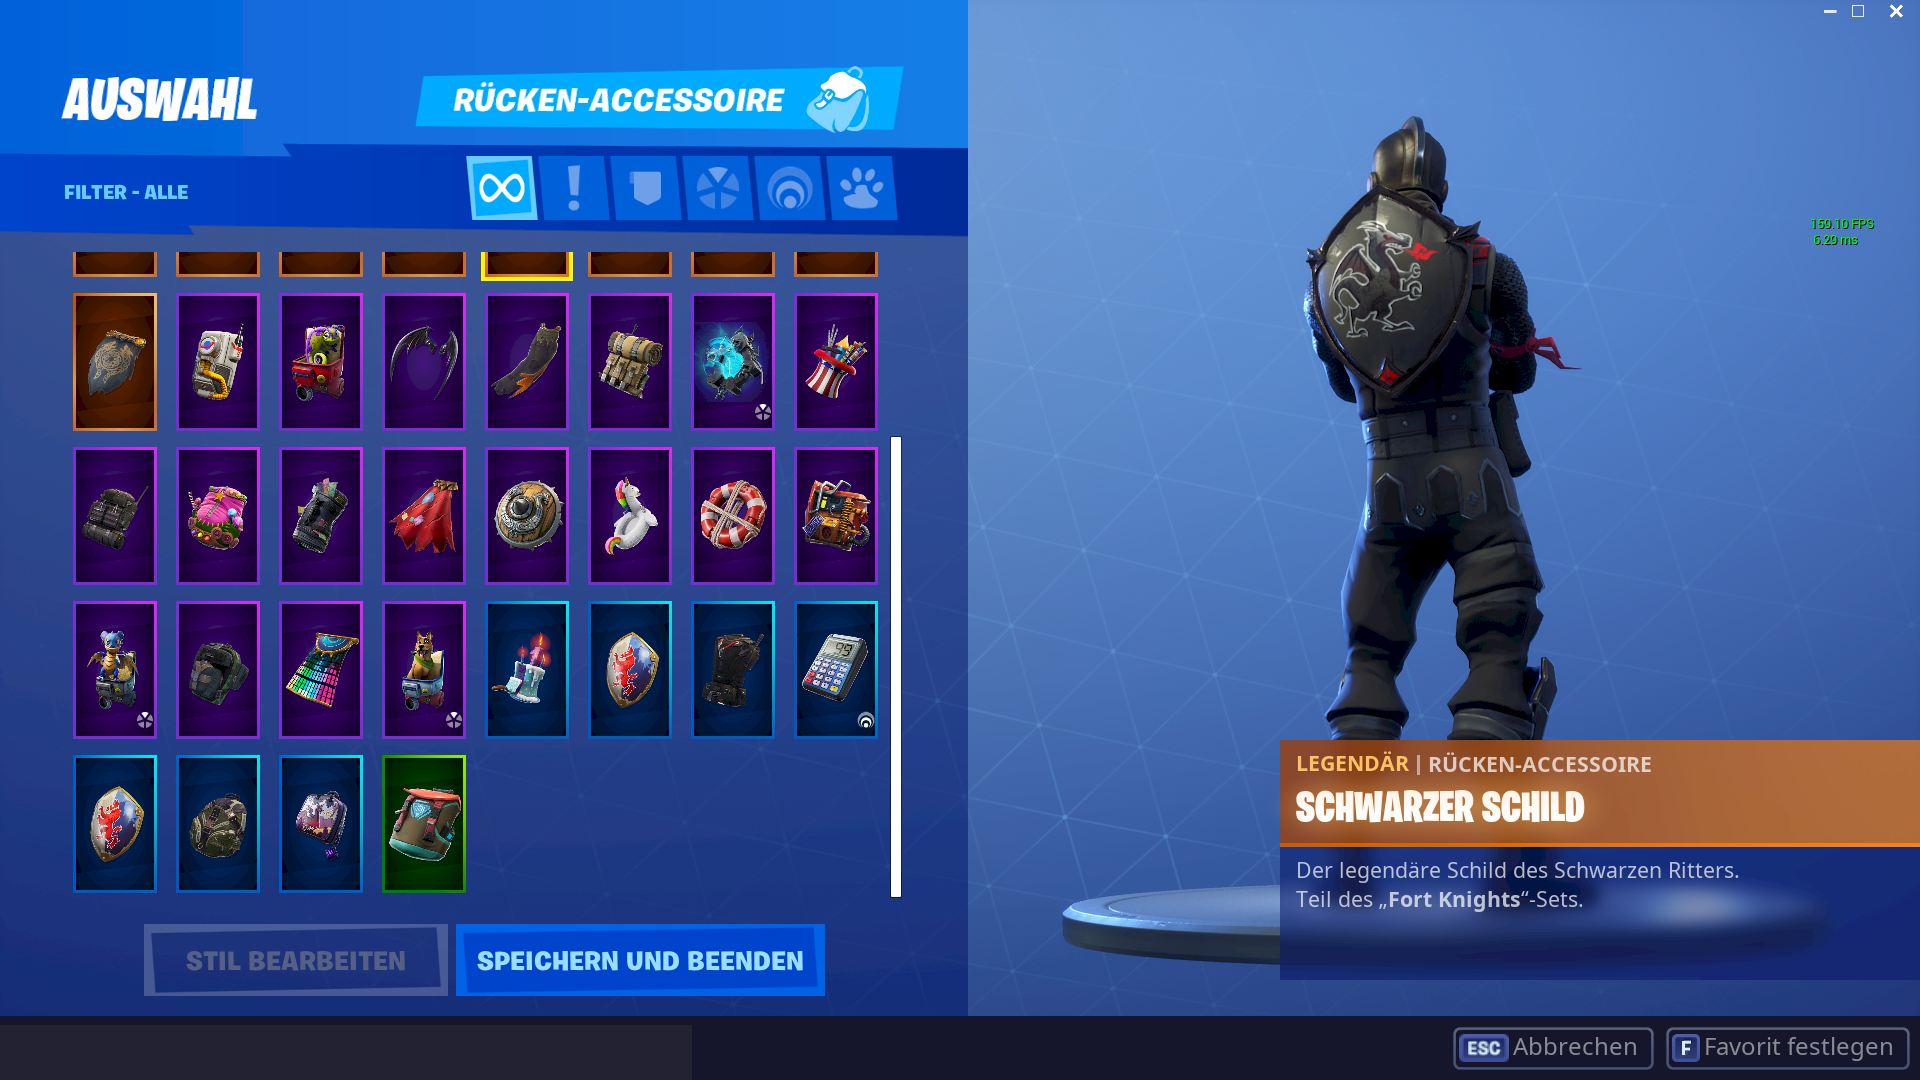 Does my fortnite account worth If yes, how much please in Euro - 3